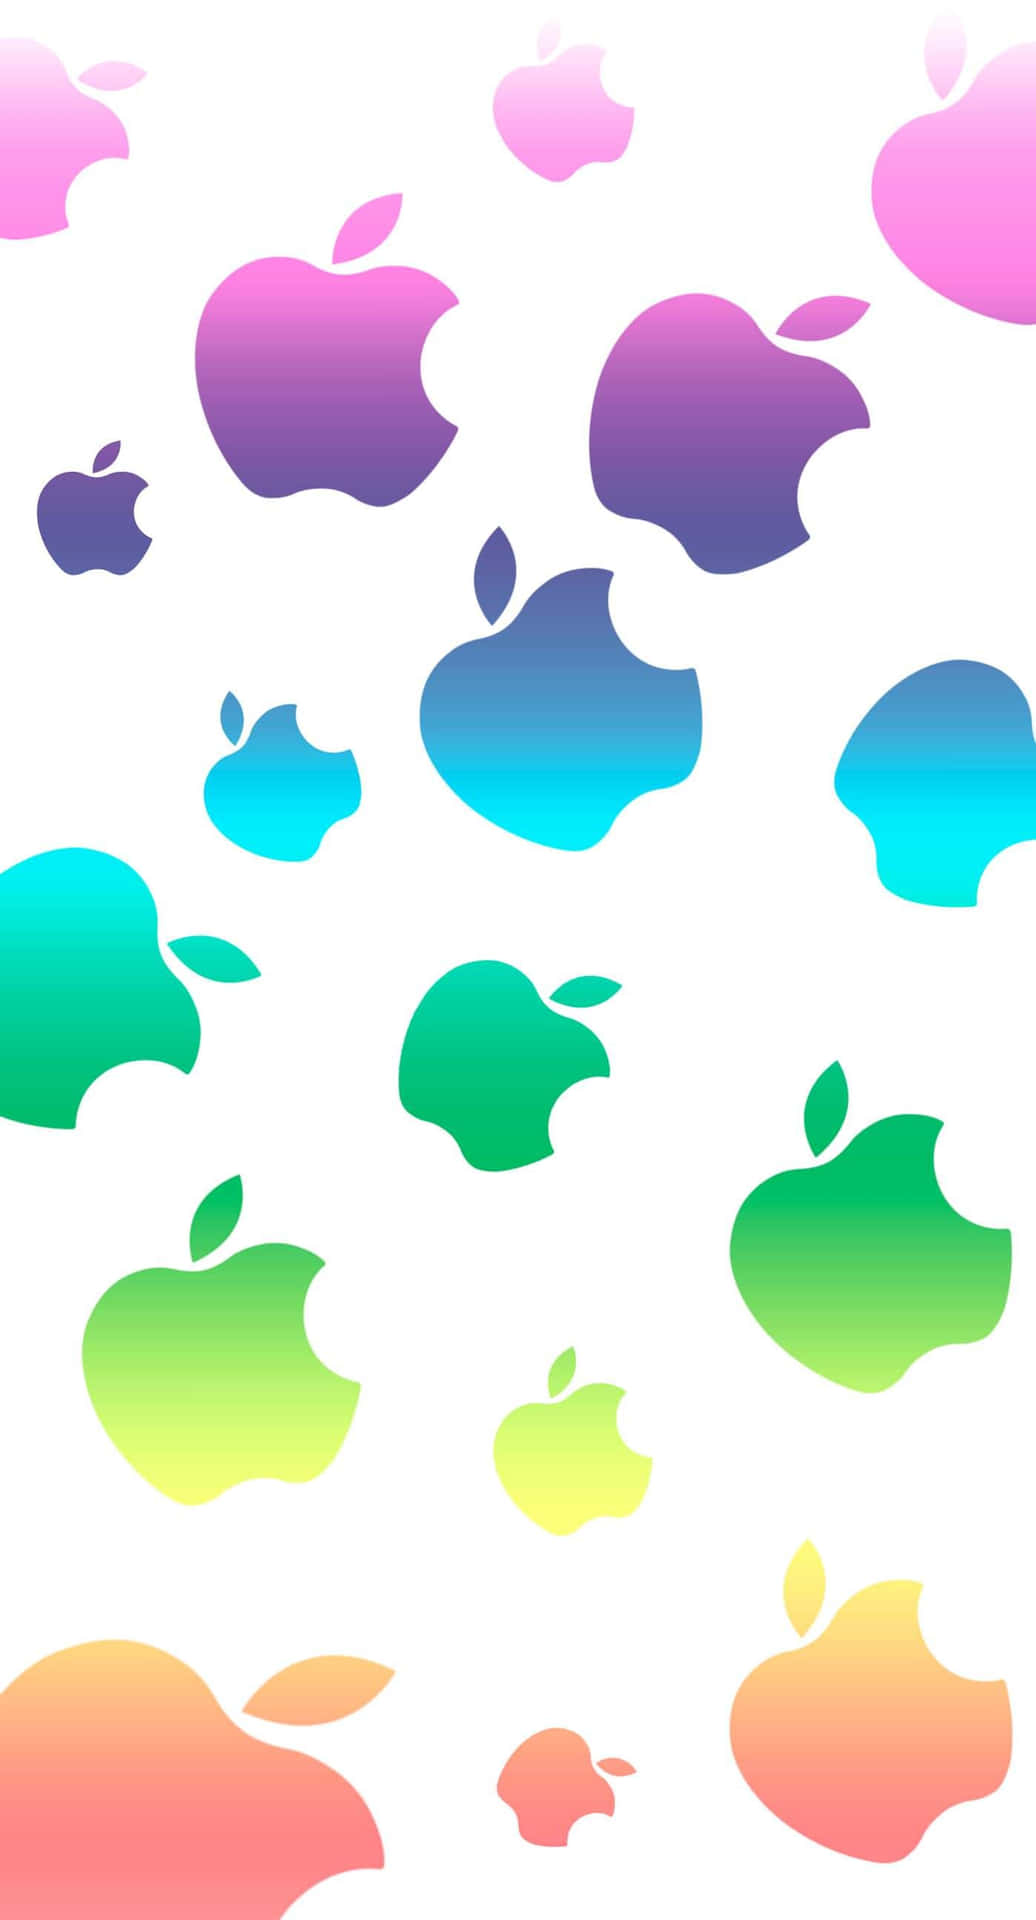 Colorful Iphone Gradient Apple Logos Background